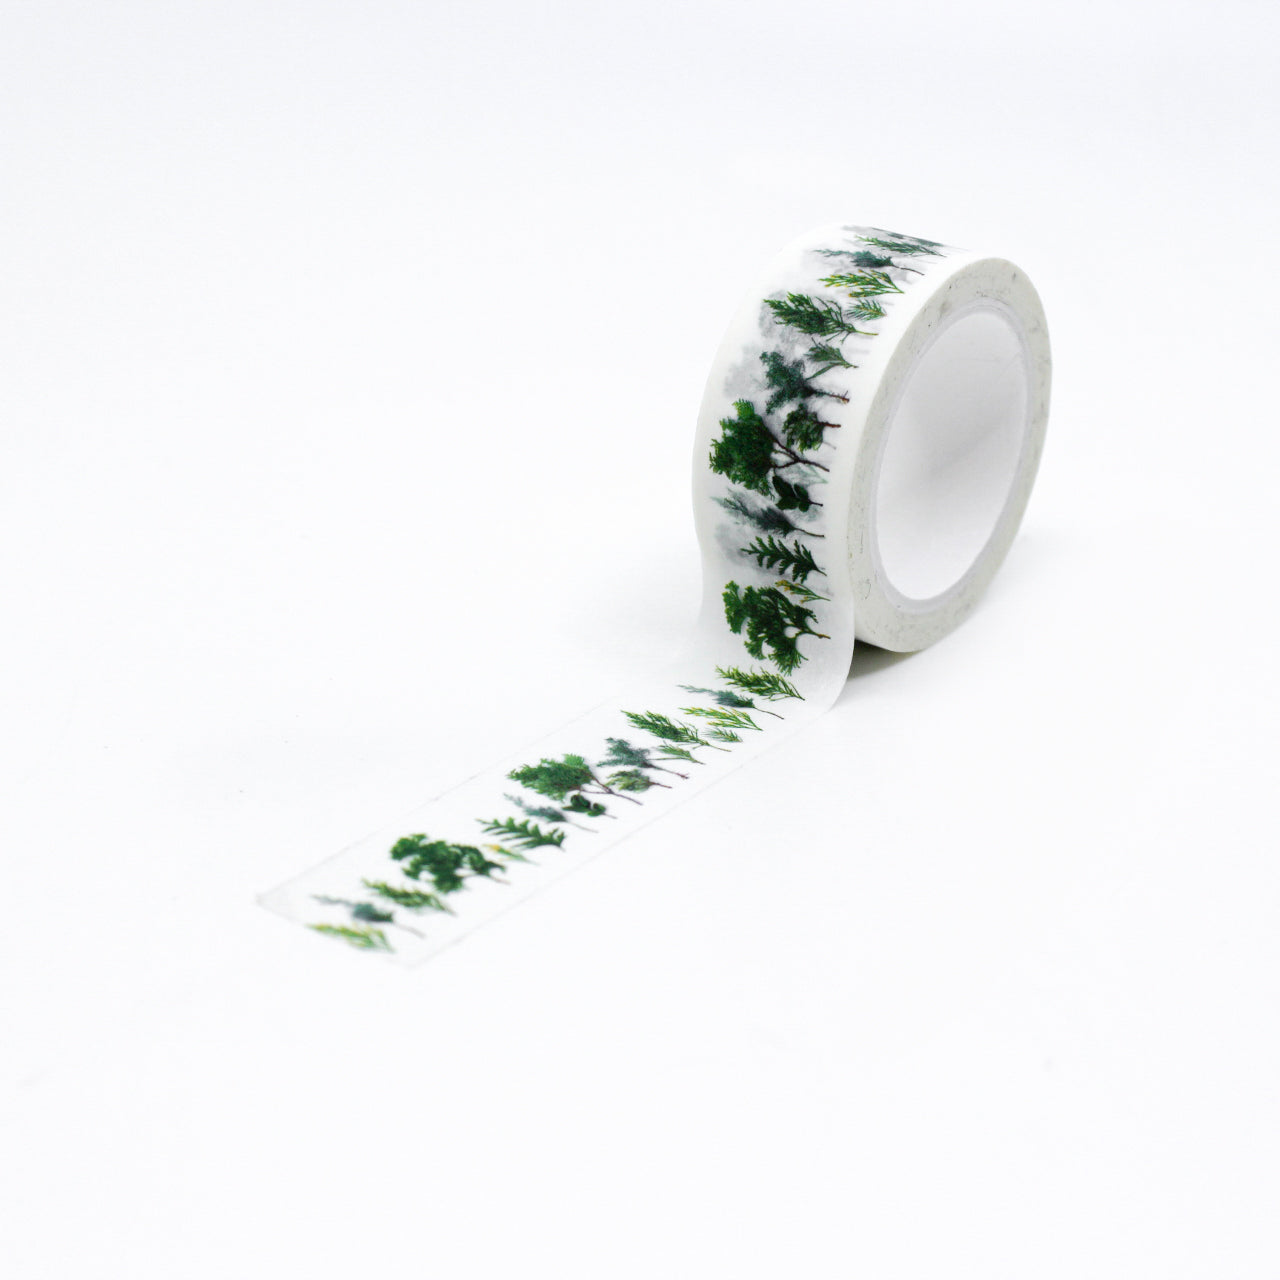 Embrace the beauty of nature with our evergreen greenery sprig washi tape, featuring a lush and vibrant sprig of evergreen foliage. Infuse your crafts with the timeless charm of nature using our evergreen greenery sprig washi tape. This tape is designed by Bottle Branch and sold at BBB Supplies Craft Shop.